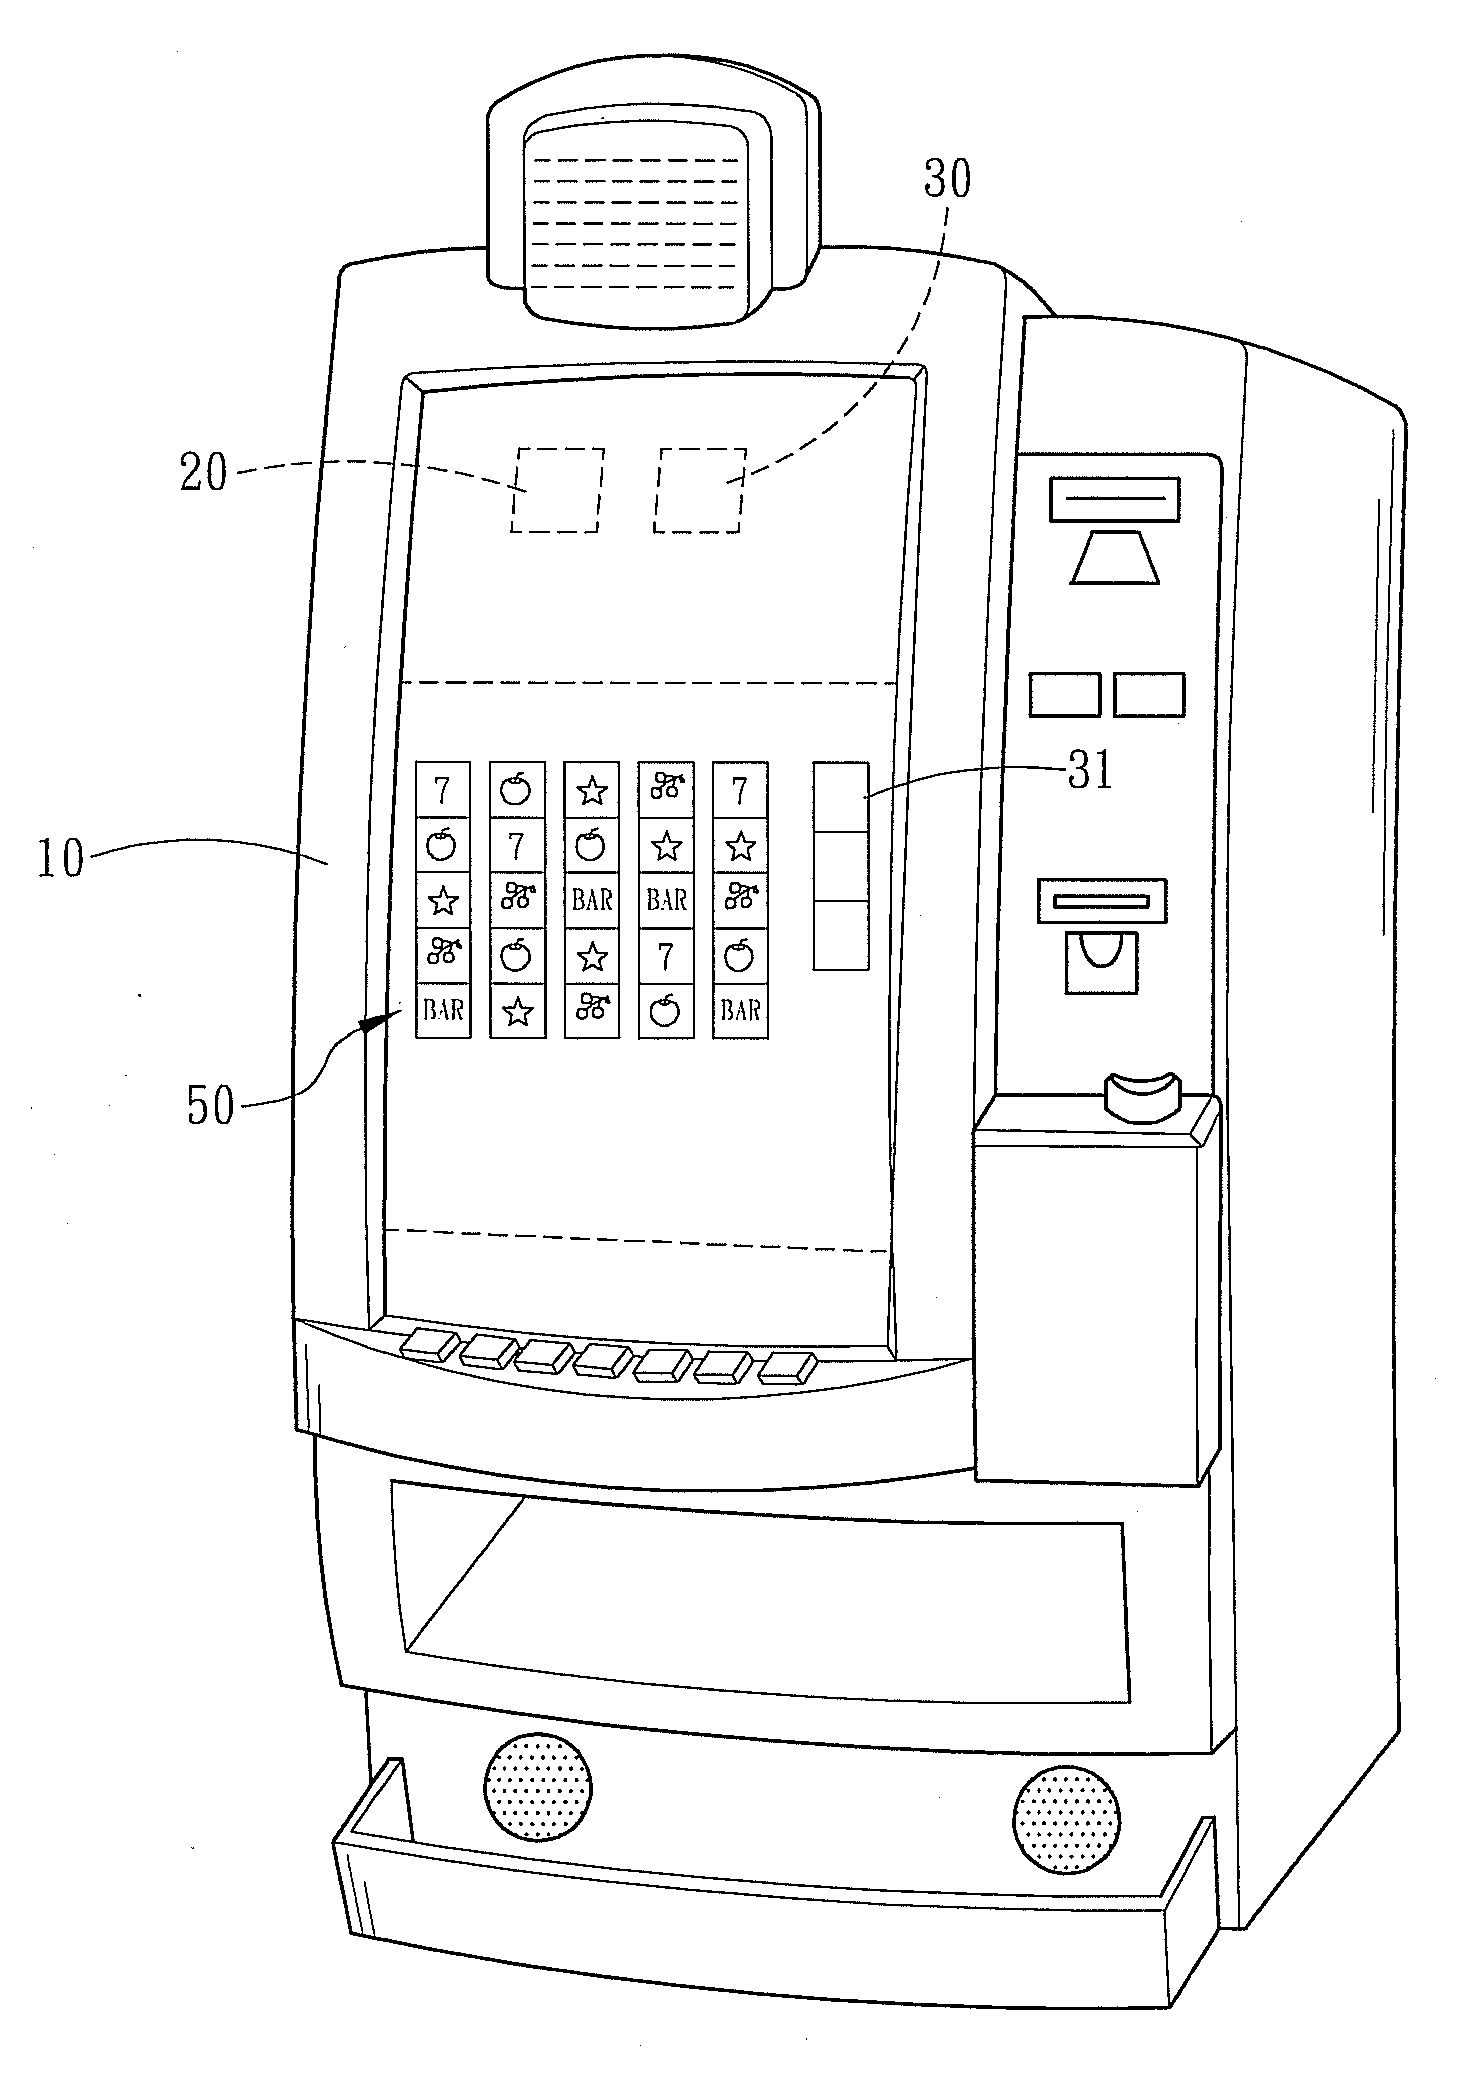 Game system and method providing card symbols collection